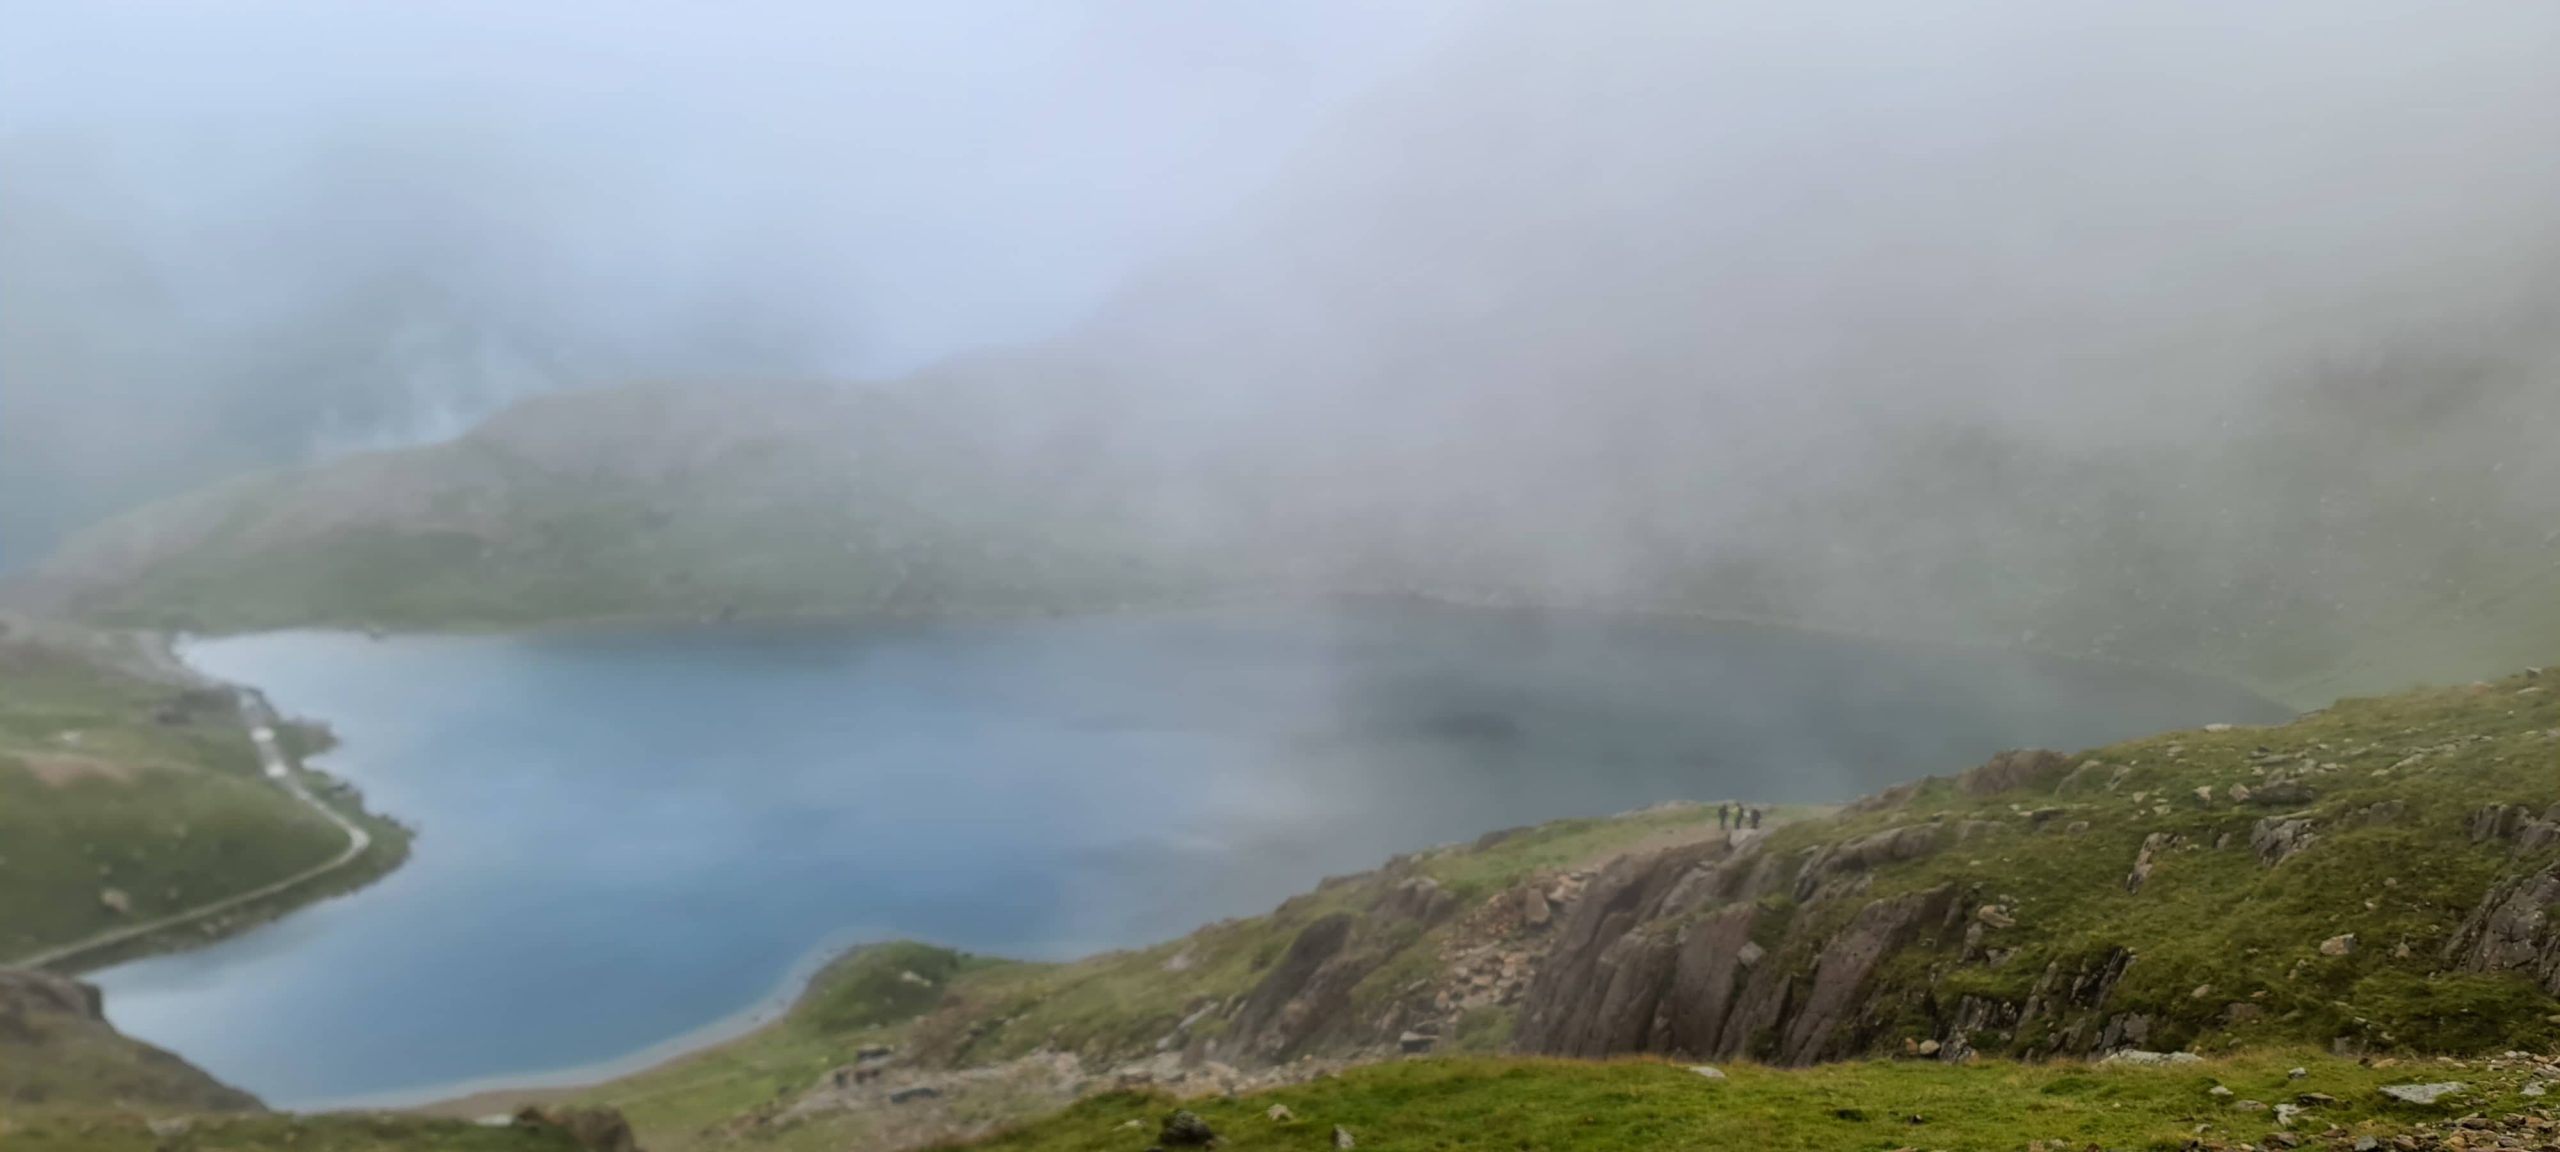 Fog over a lake on a hike up Pyg track up Snowden in Wales